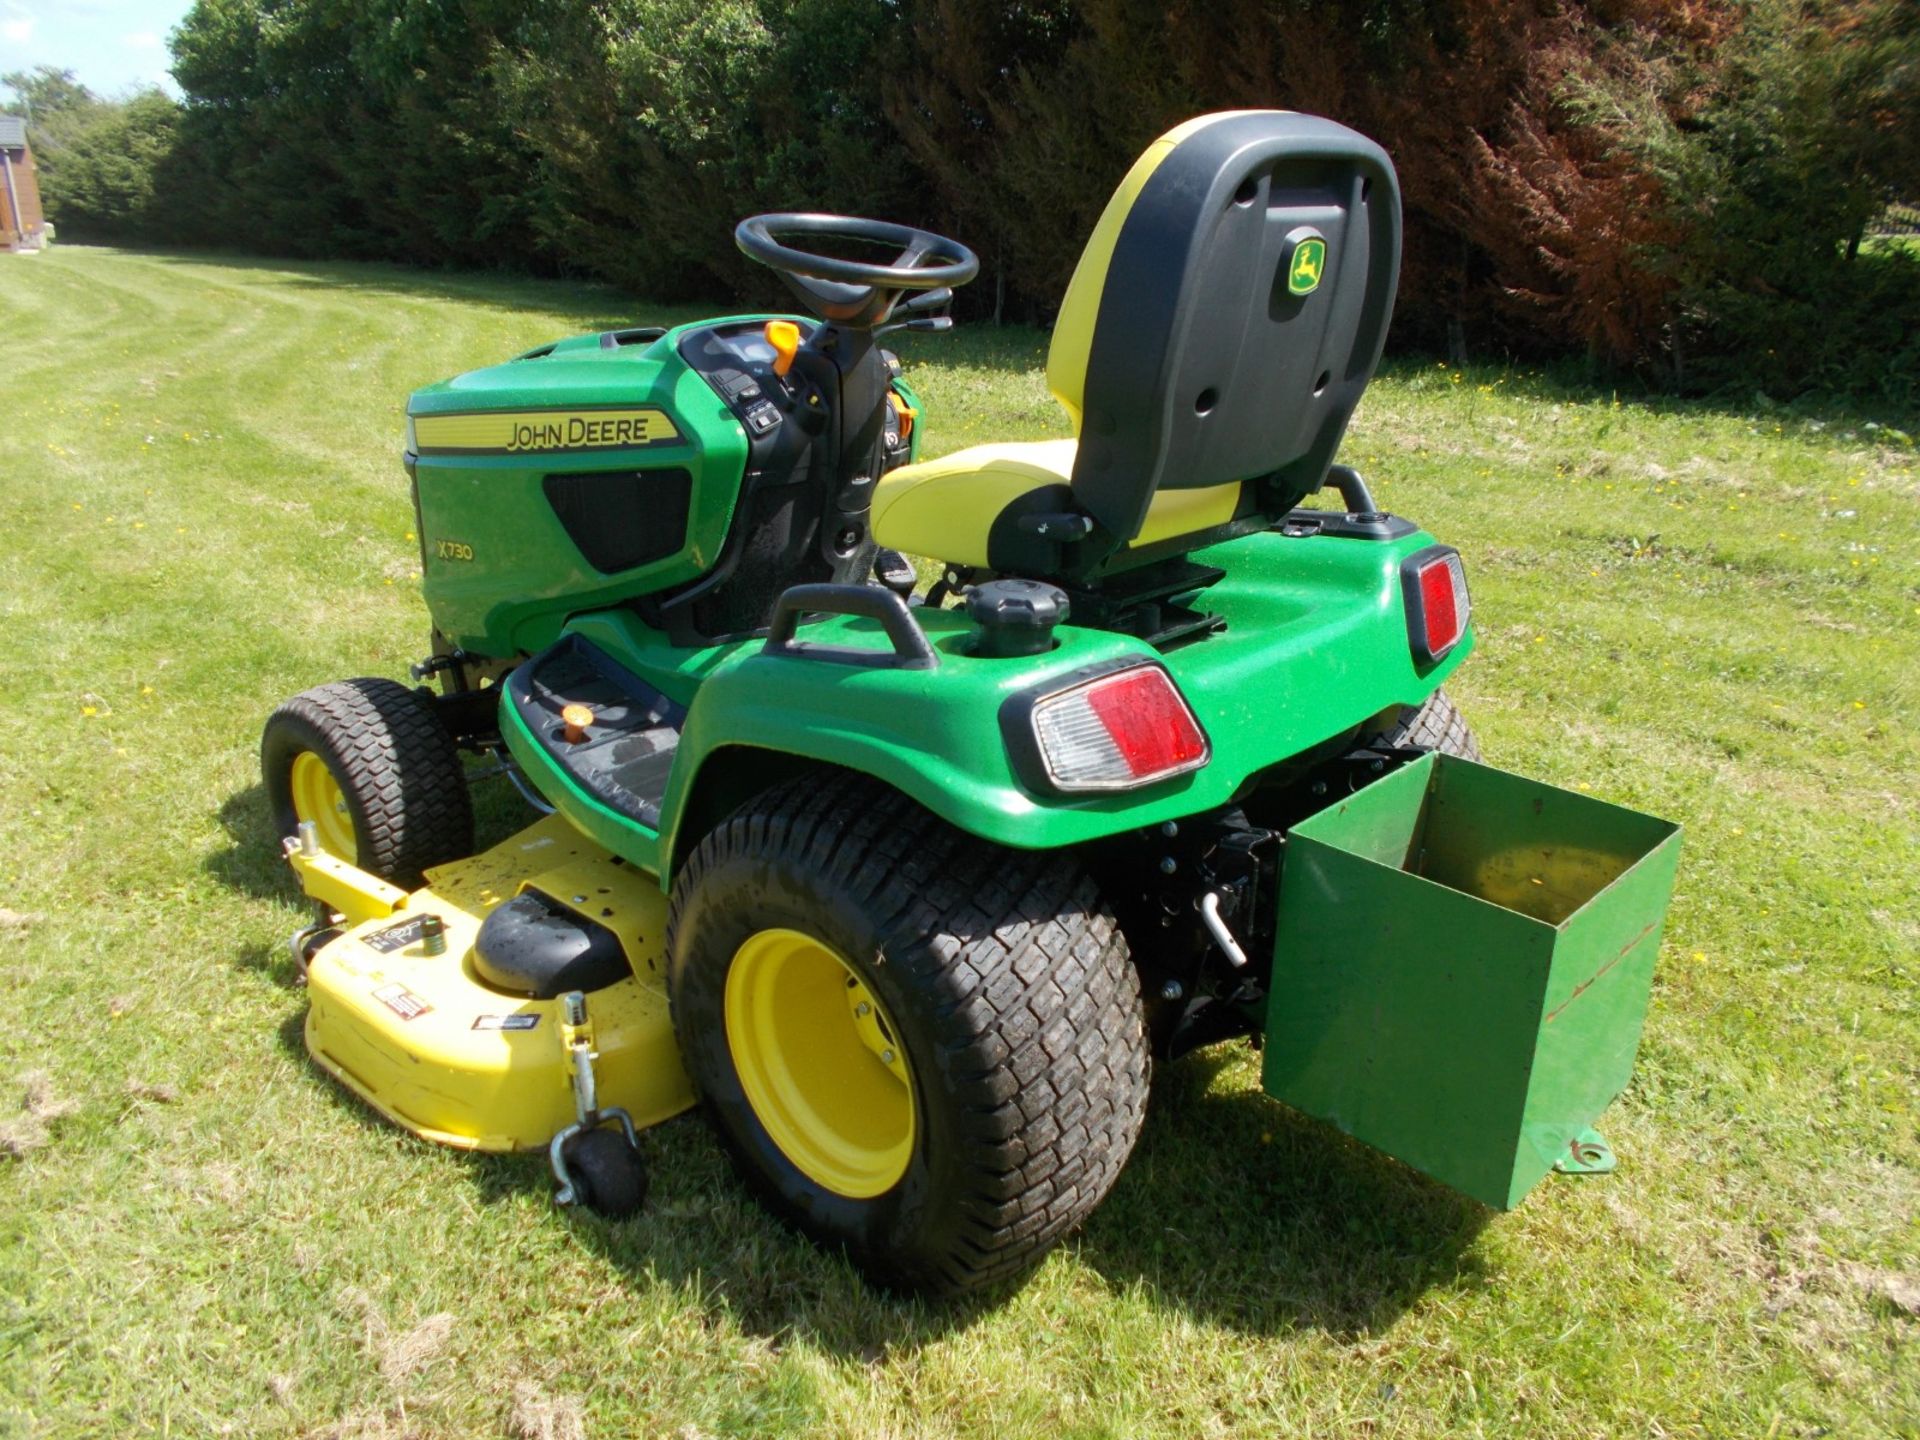 2018 JOHN DEERE X730 RIDE ON LAWN TRACTOR, 194 HOURS, 60” CUTTING DECK *PLUS VAT* - Image 7 of 20